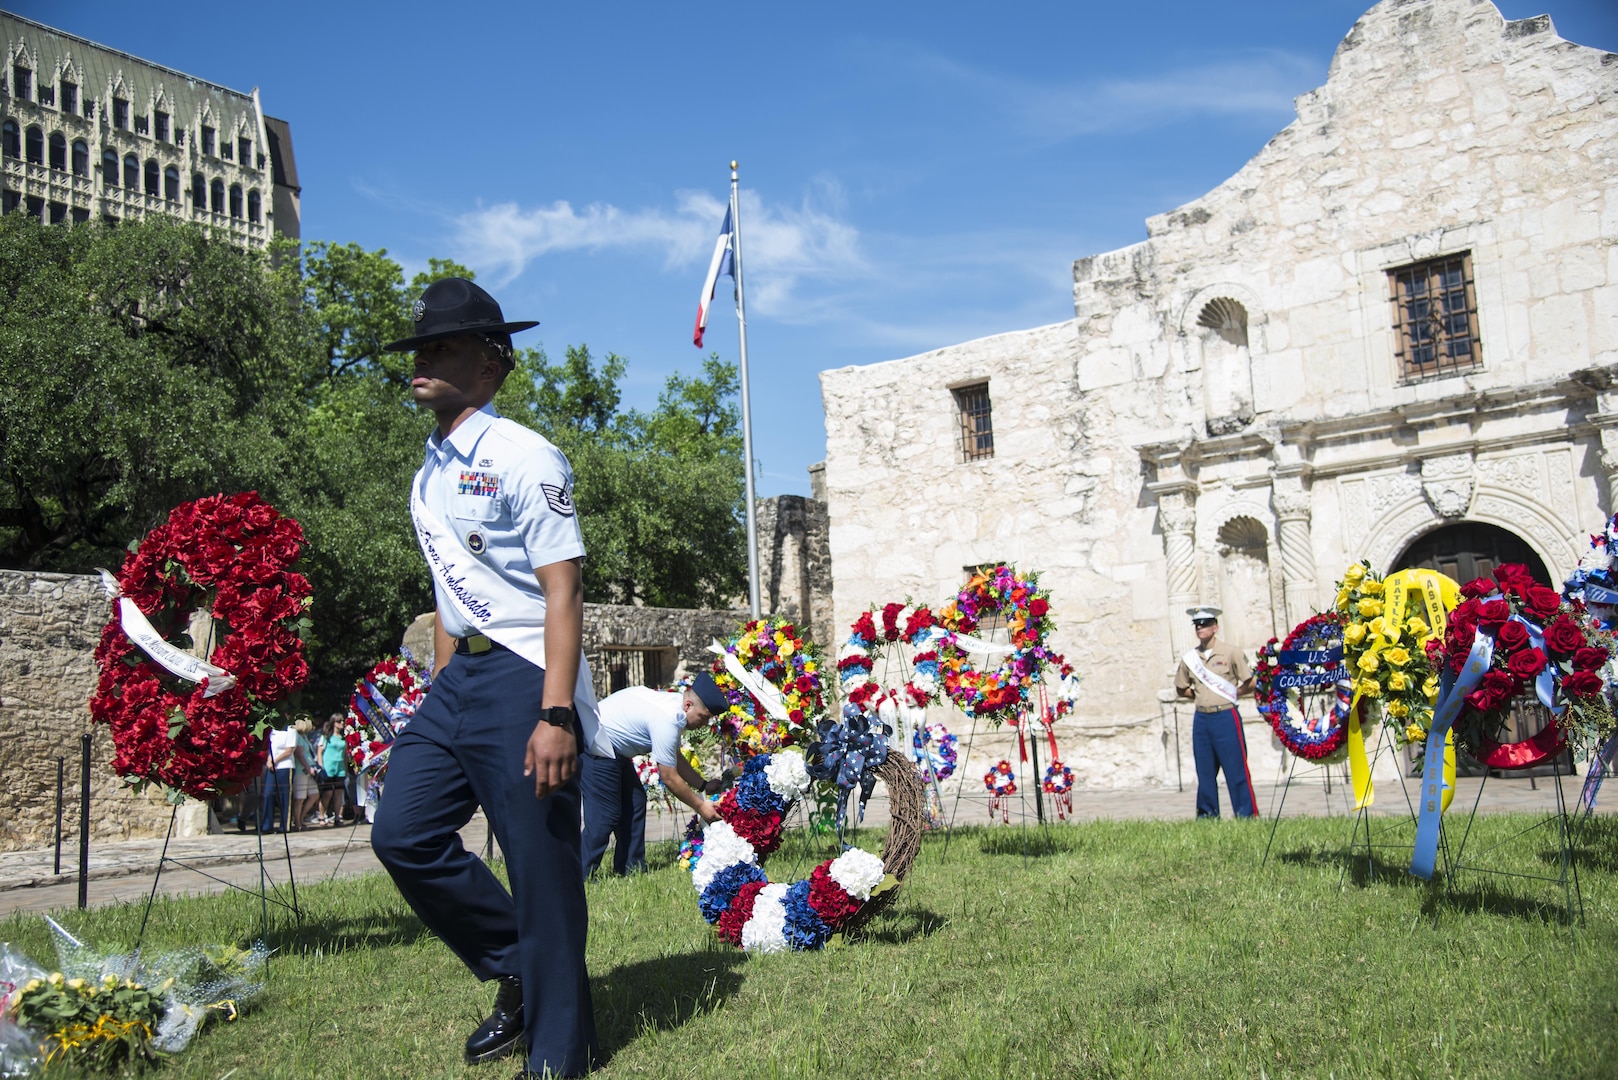 The 2017 military ambassadors display wreaths in front of the Alamo during the annual San Antonio Fiesta Pilgrimage to the Alamo event April 24, 2017. The pilgrimage is a processional and memorial tribute to the Alamo heroes and the heritage of Texas. 